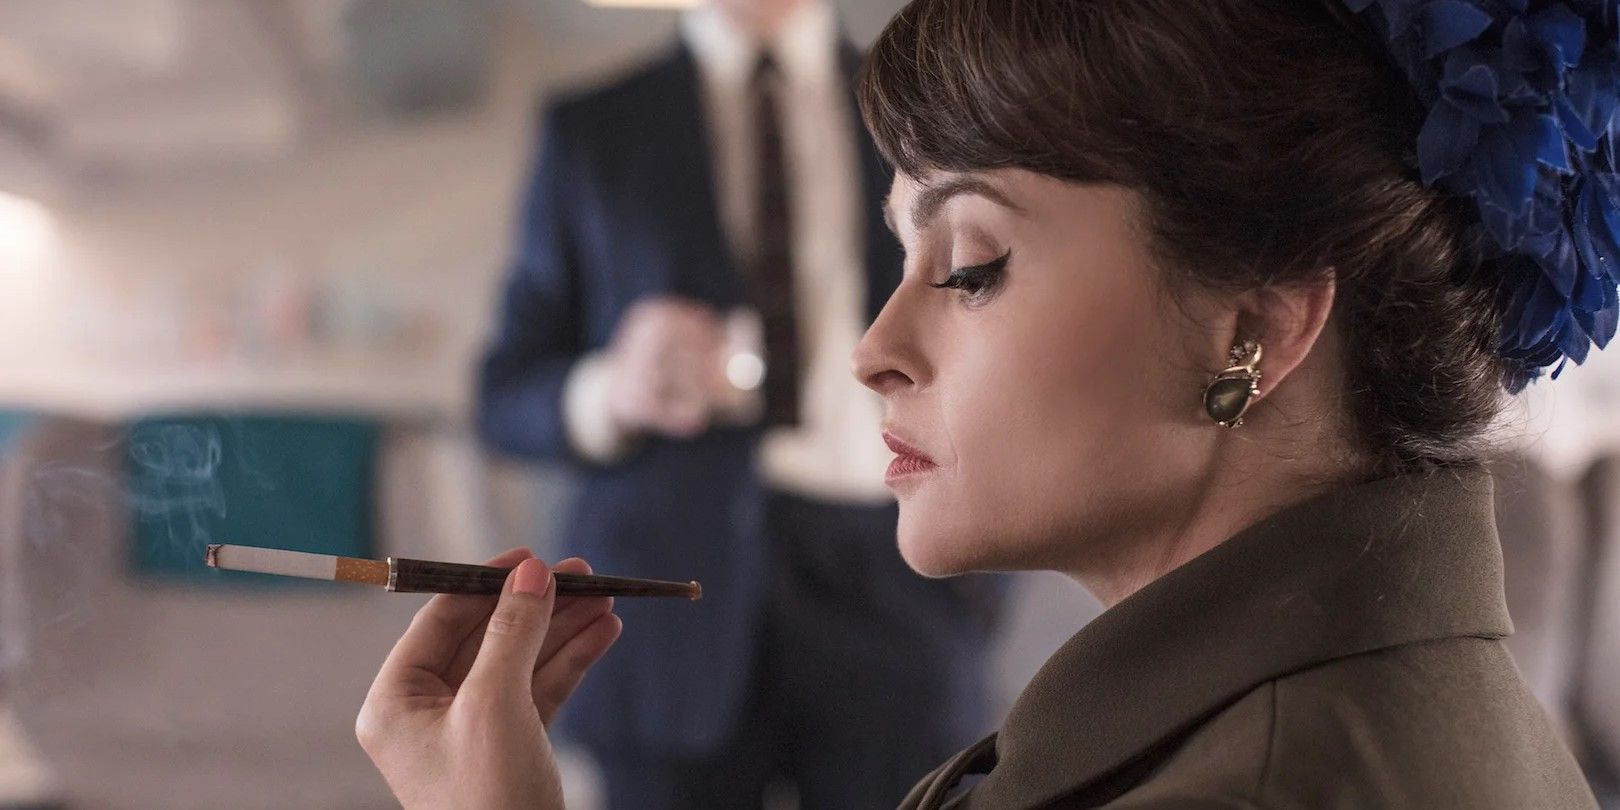 Princess Margaret looking at a cigarette in The Crown